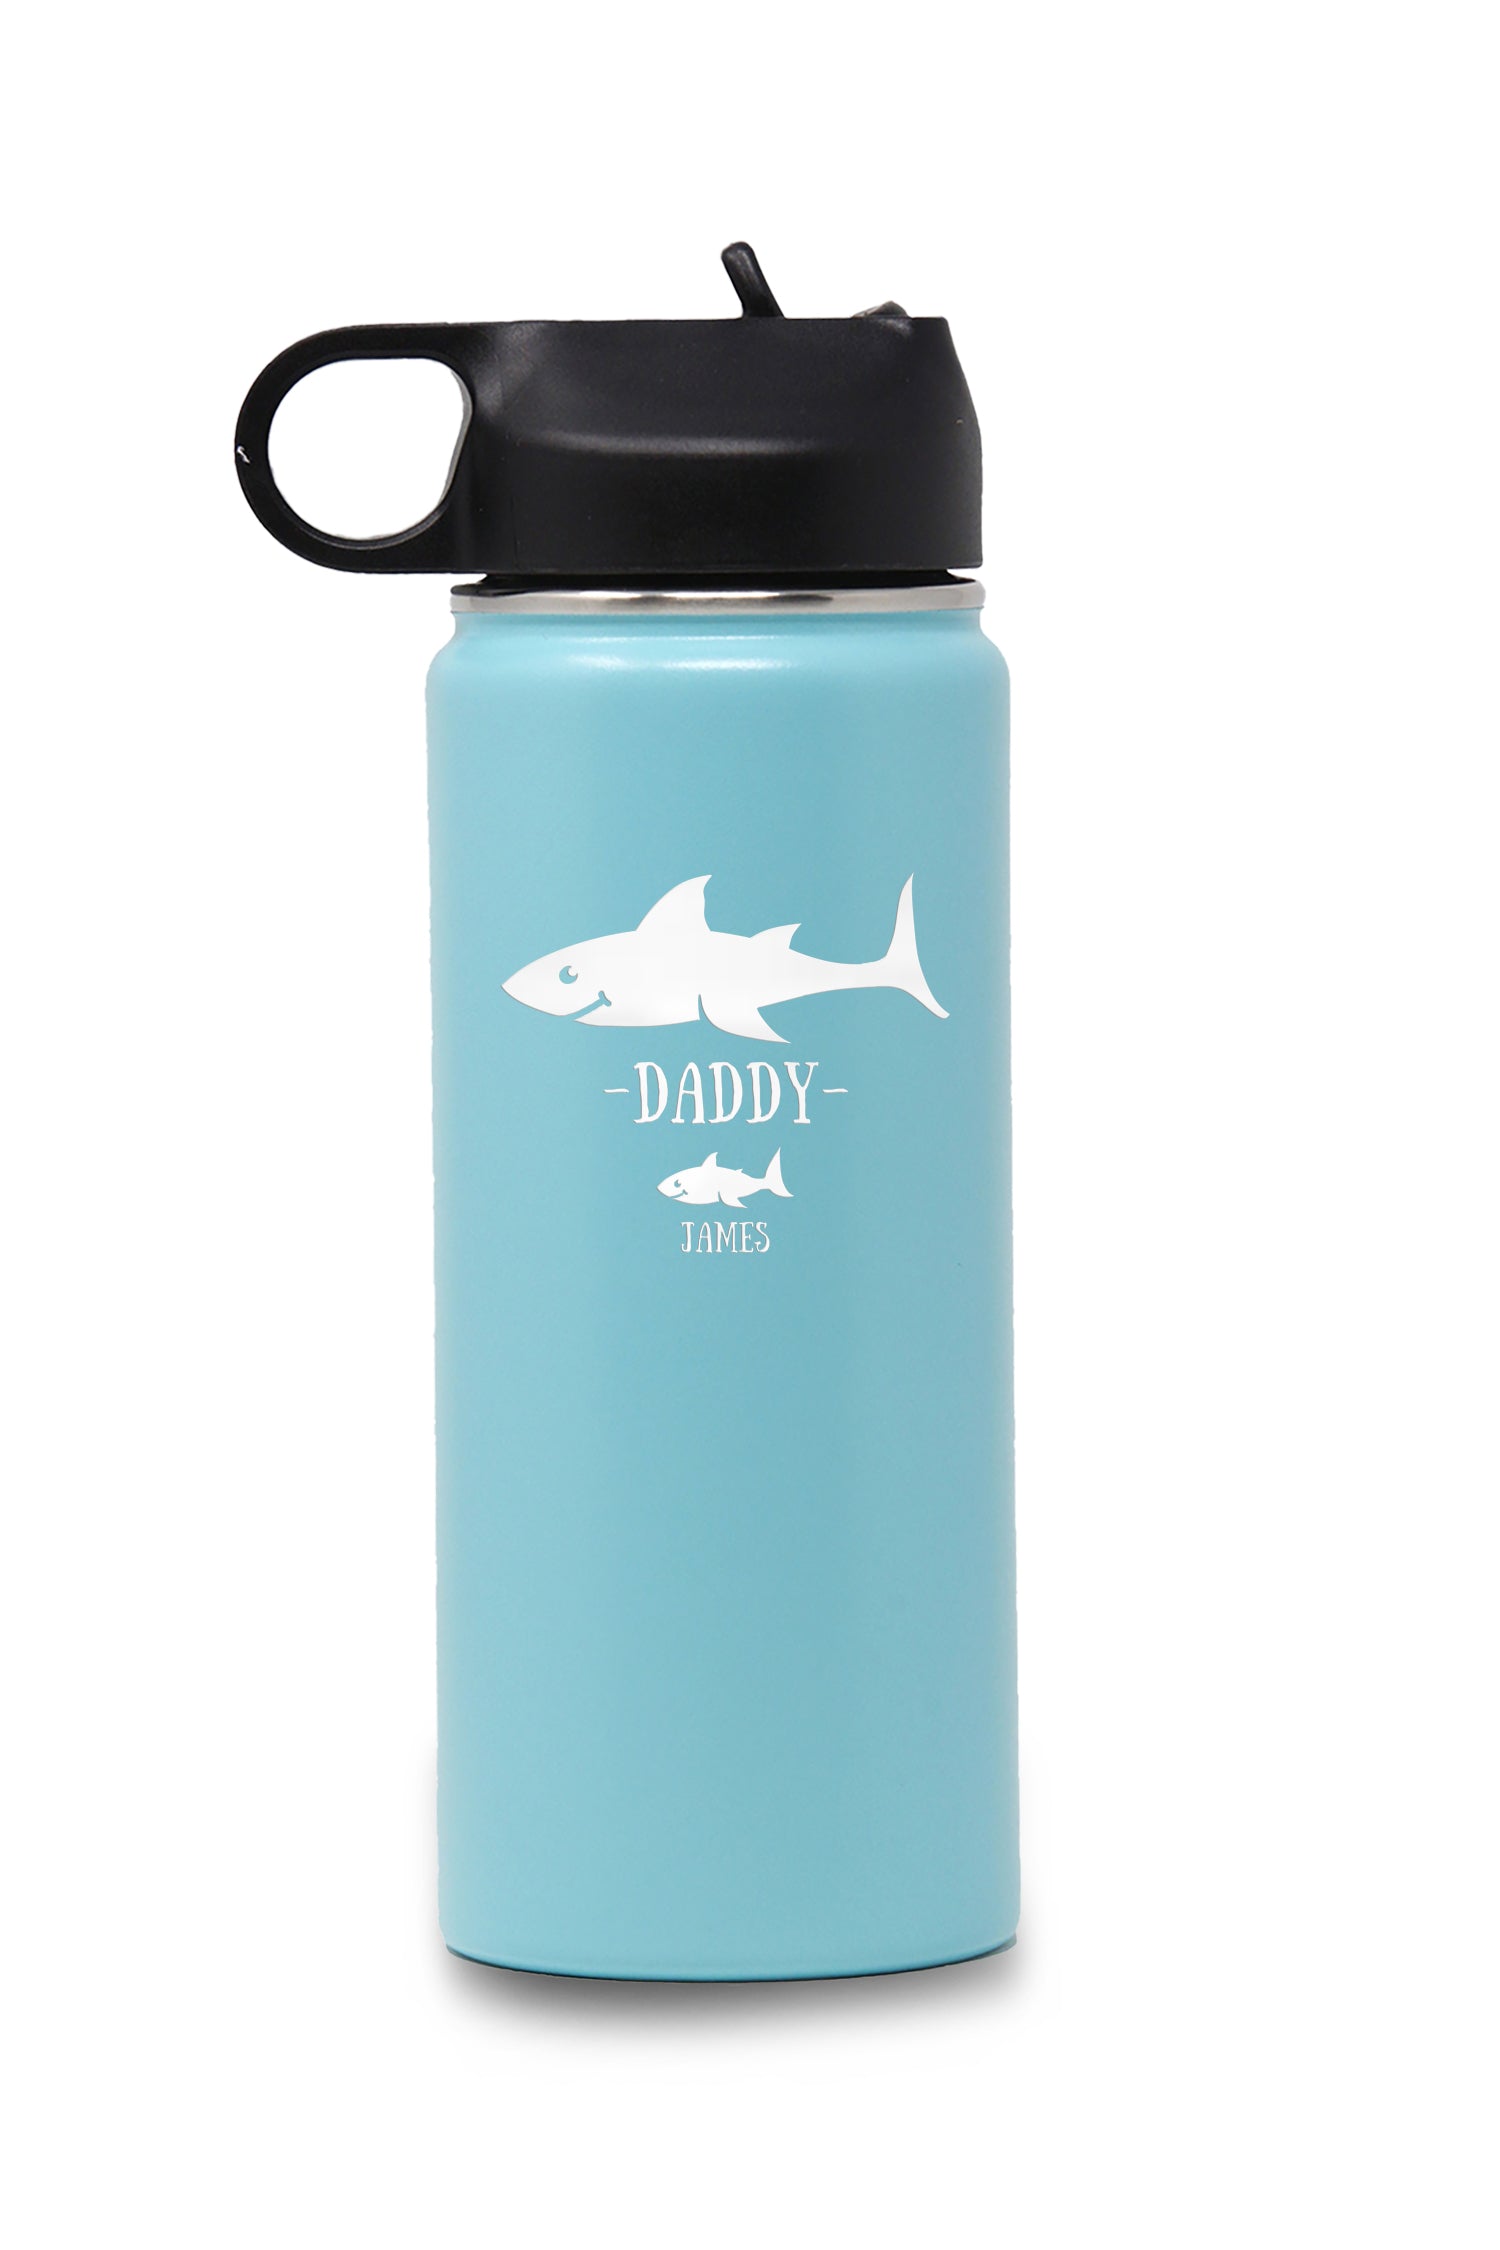 18oz Daddy Shark Water Bottle with Lid and Straw, Insulated Stainless Steel Sports Water Bottle Double Wall Vacuum Insulated Gift Cup